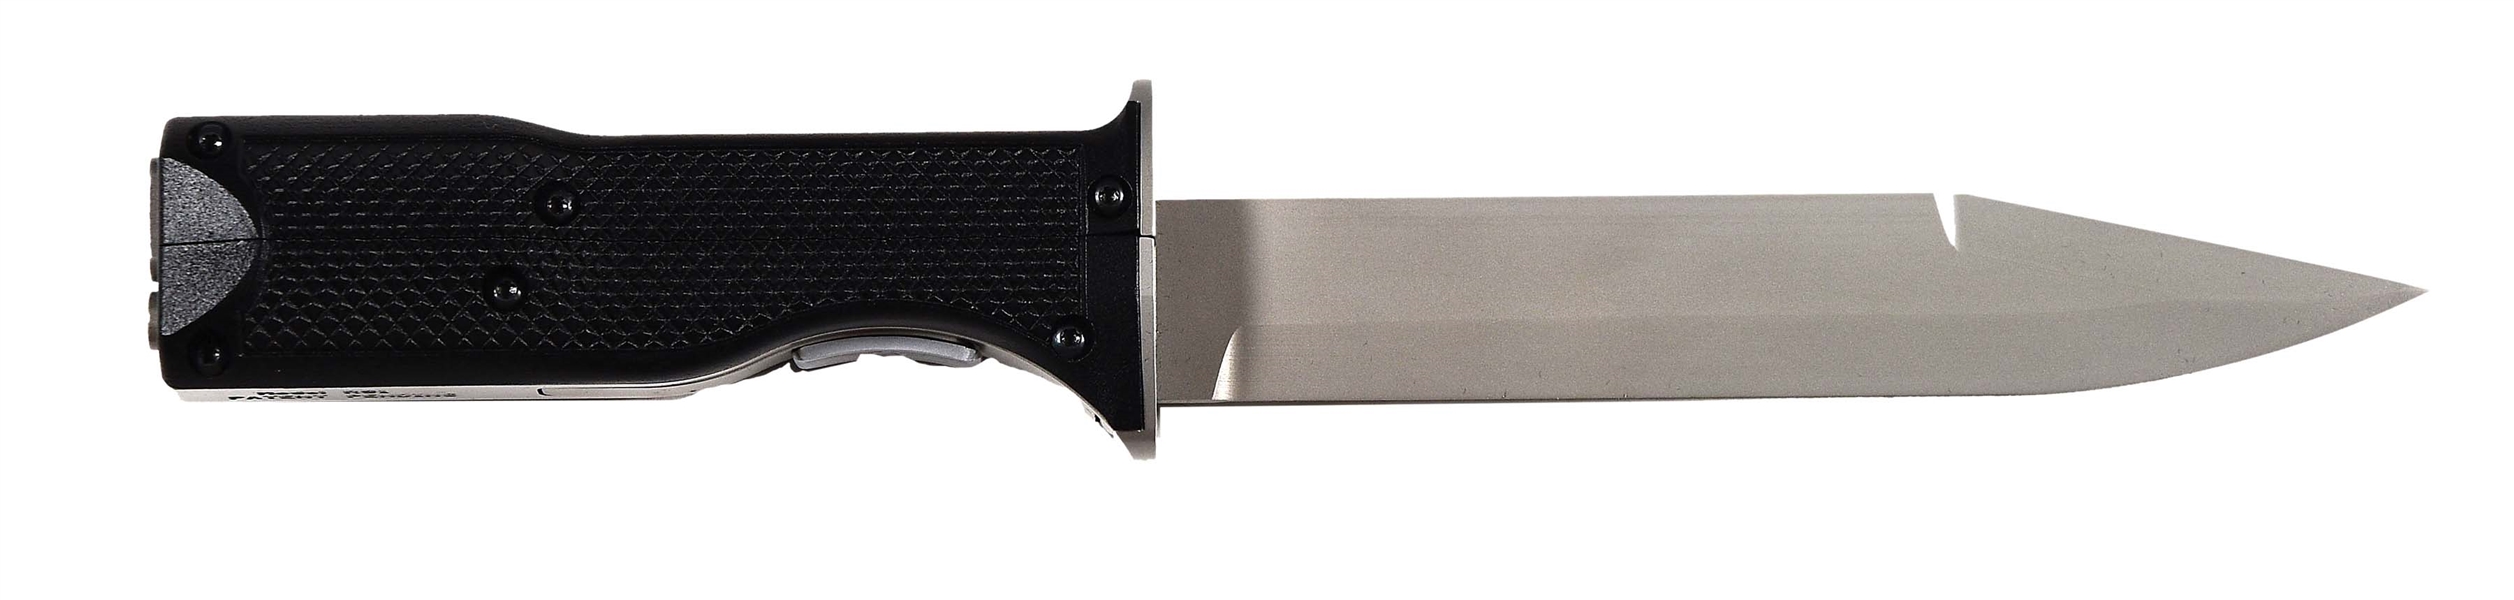 (N) NEW IN BOX STAINLESS FINISH G.R.A.D. MODEL RS1 HYBRID KNIFE/GUN (ANY OTHER WEAPON).